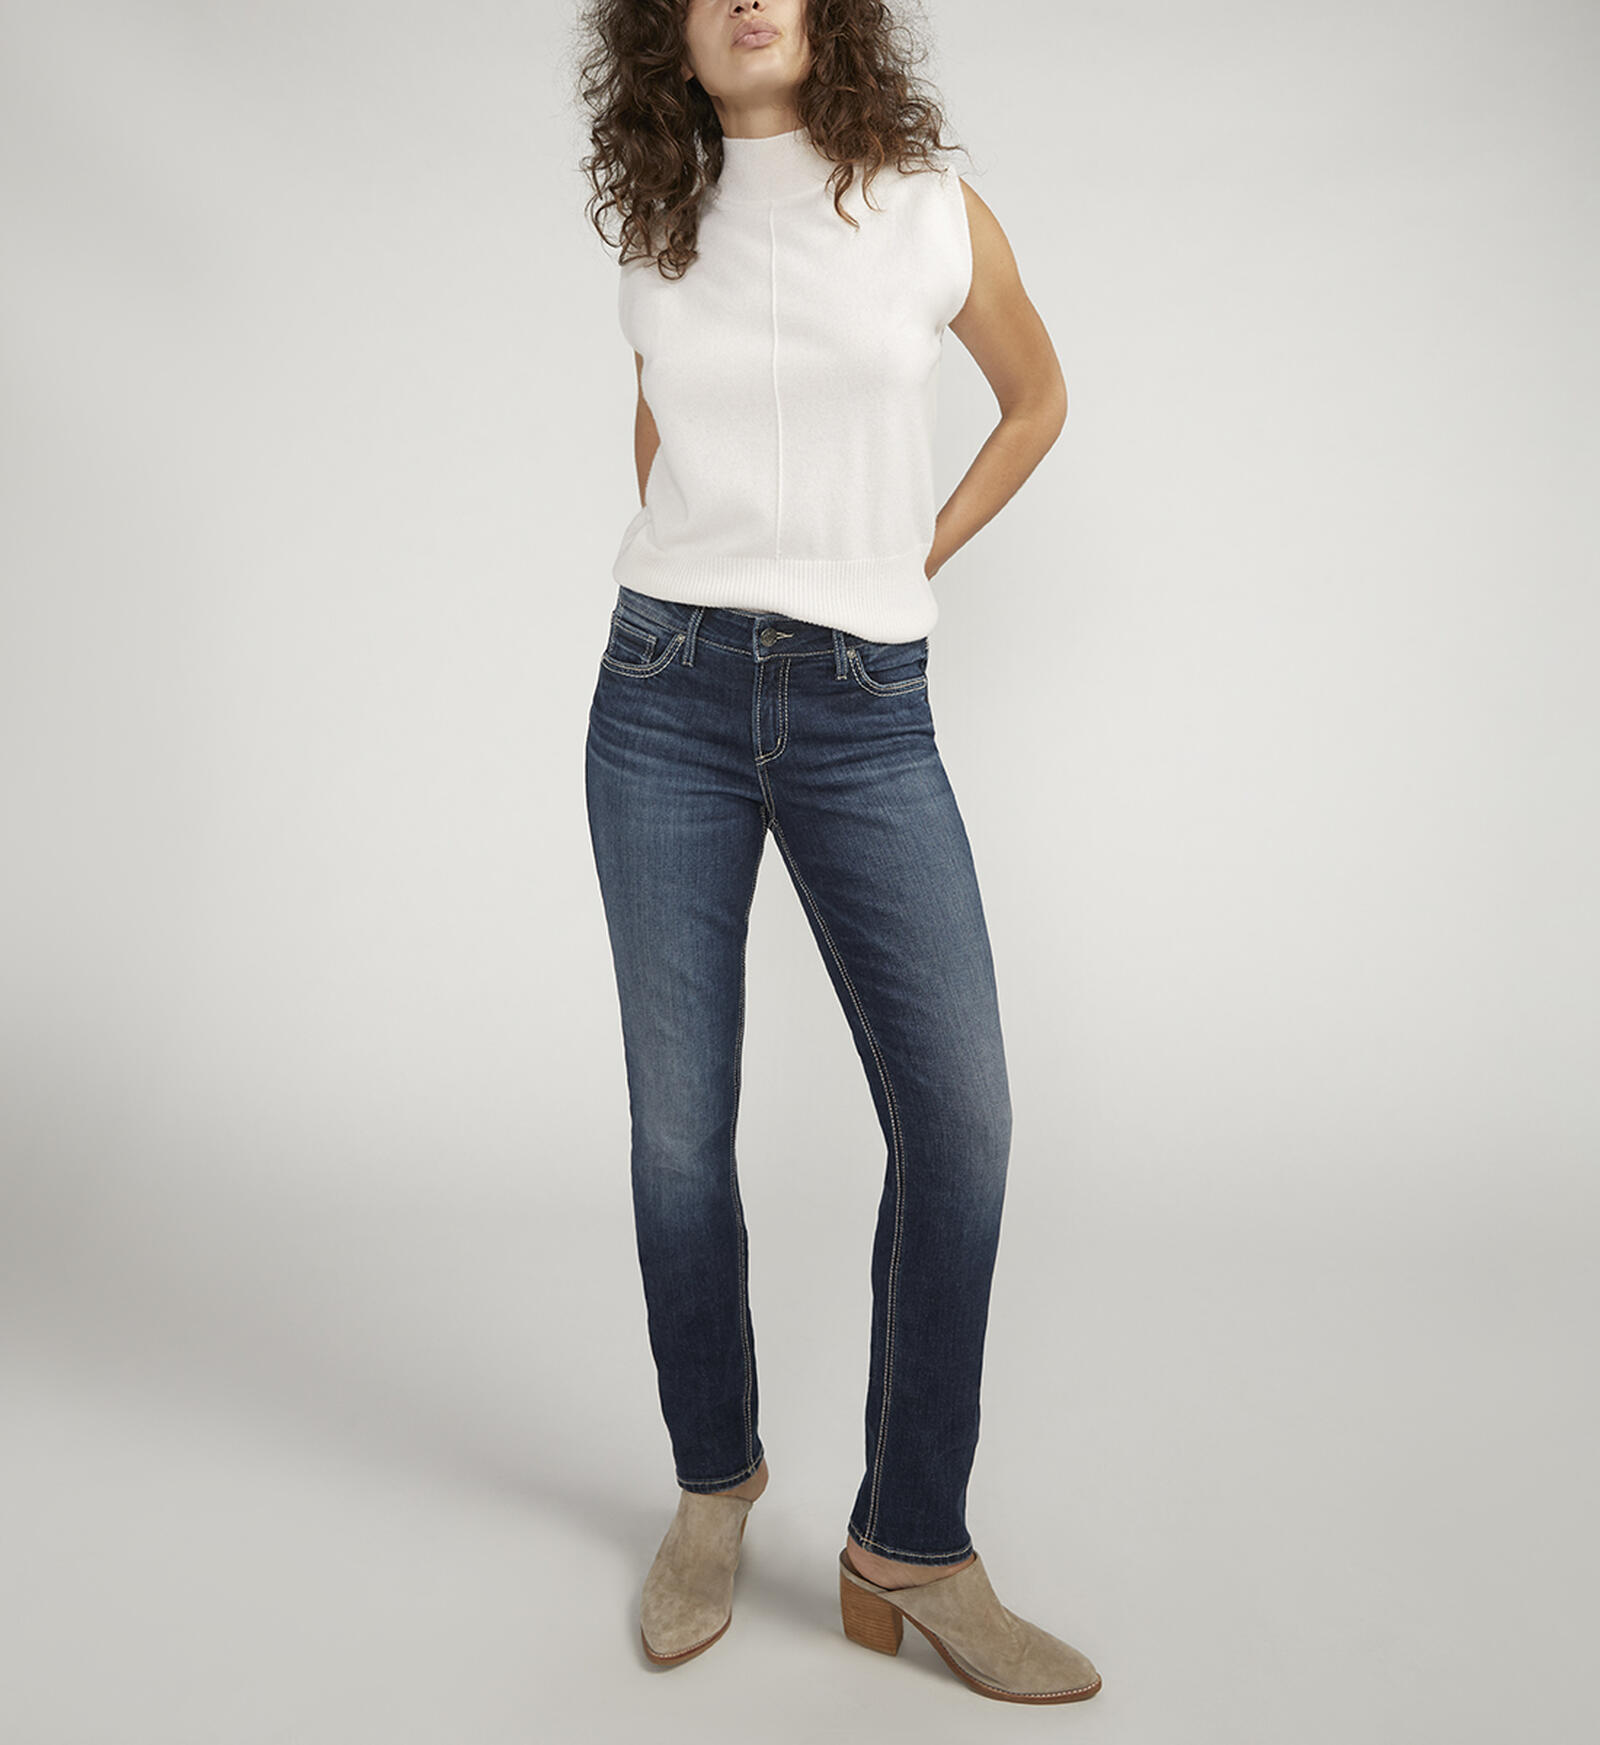 Buy Elyse Mid Rise Straight Leg Jeans for USD 84.00